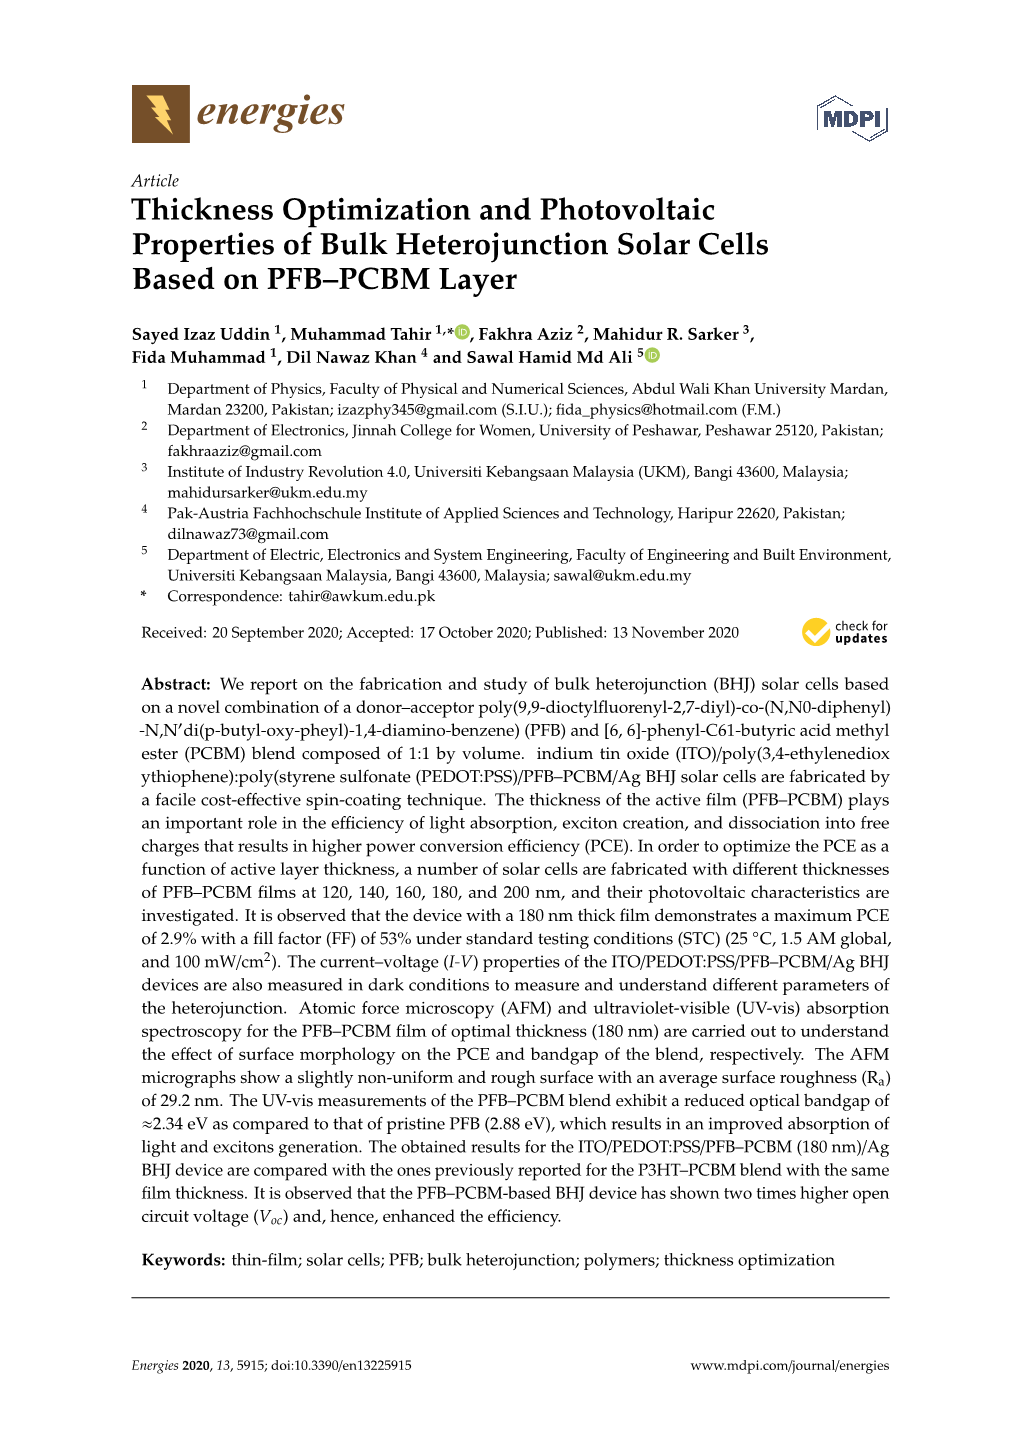 Thickness Optimization and Photovoltaic Properties of Bulk Heterojunction Solar Cells Based on PFB–PCBM Layer